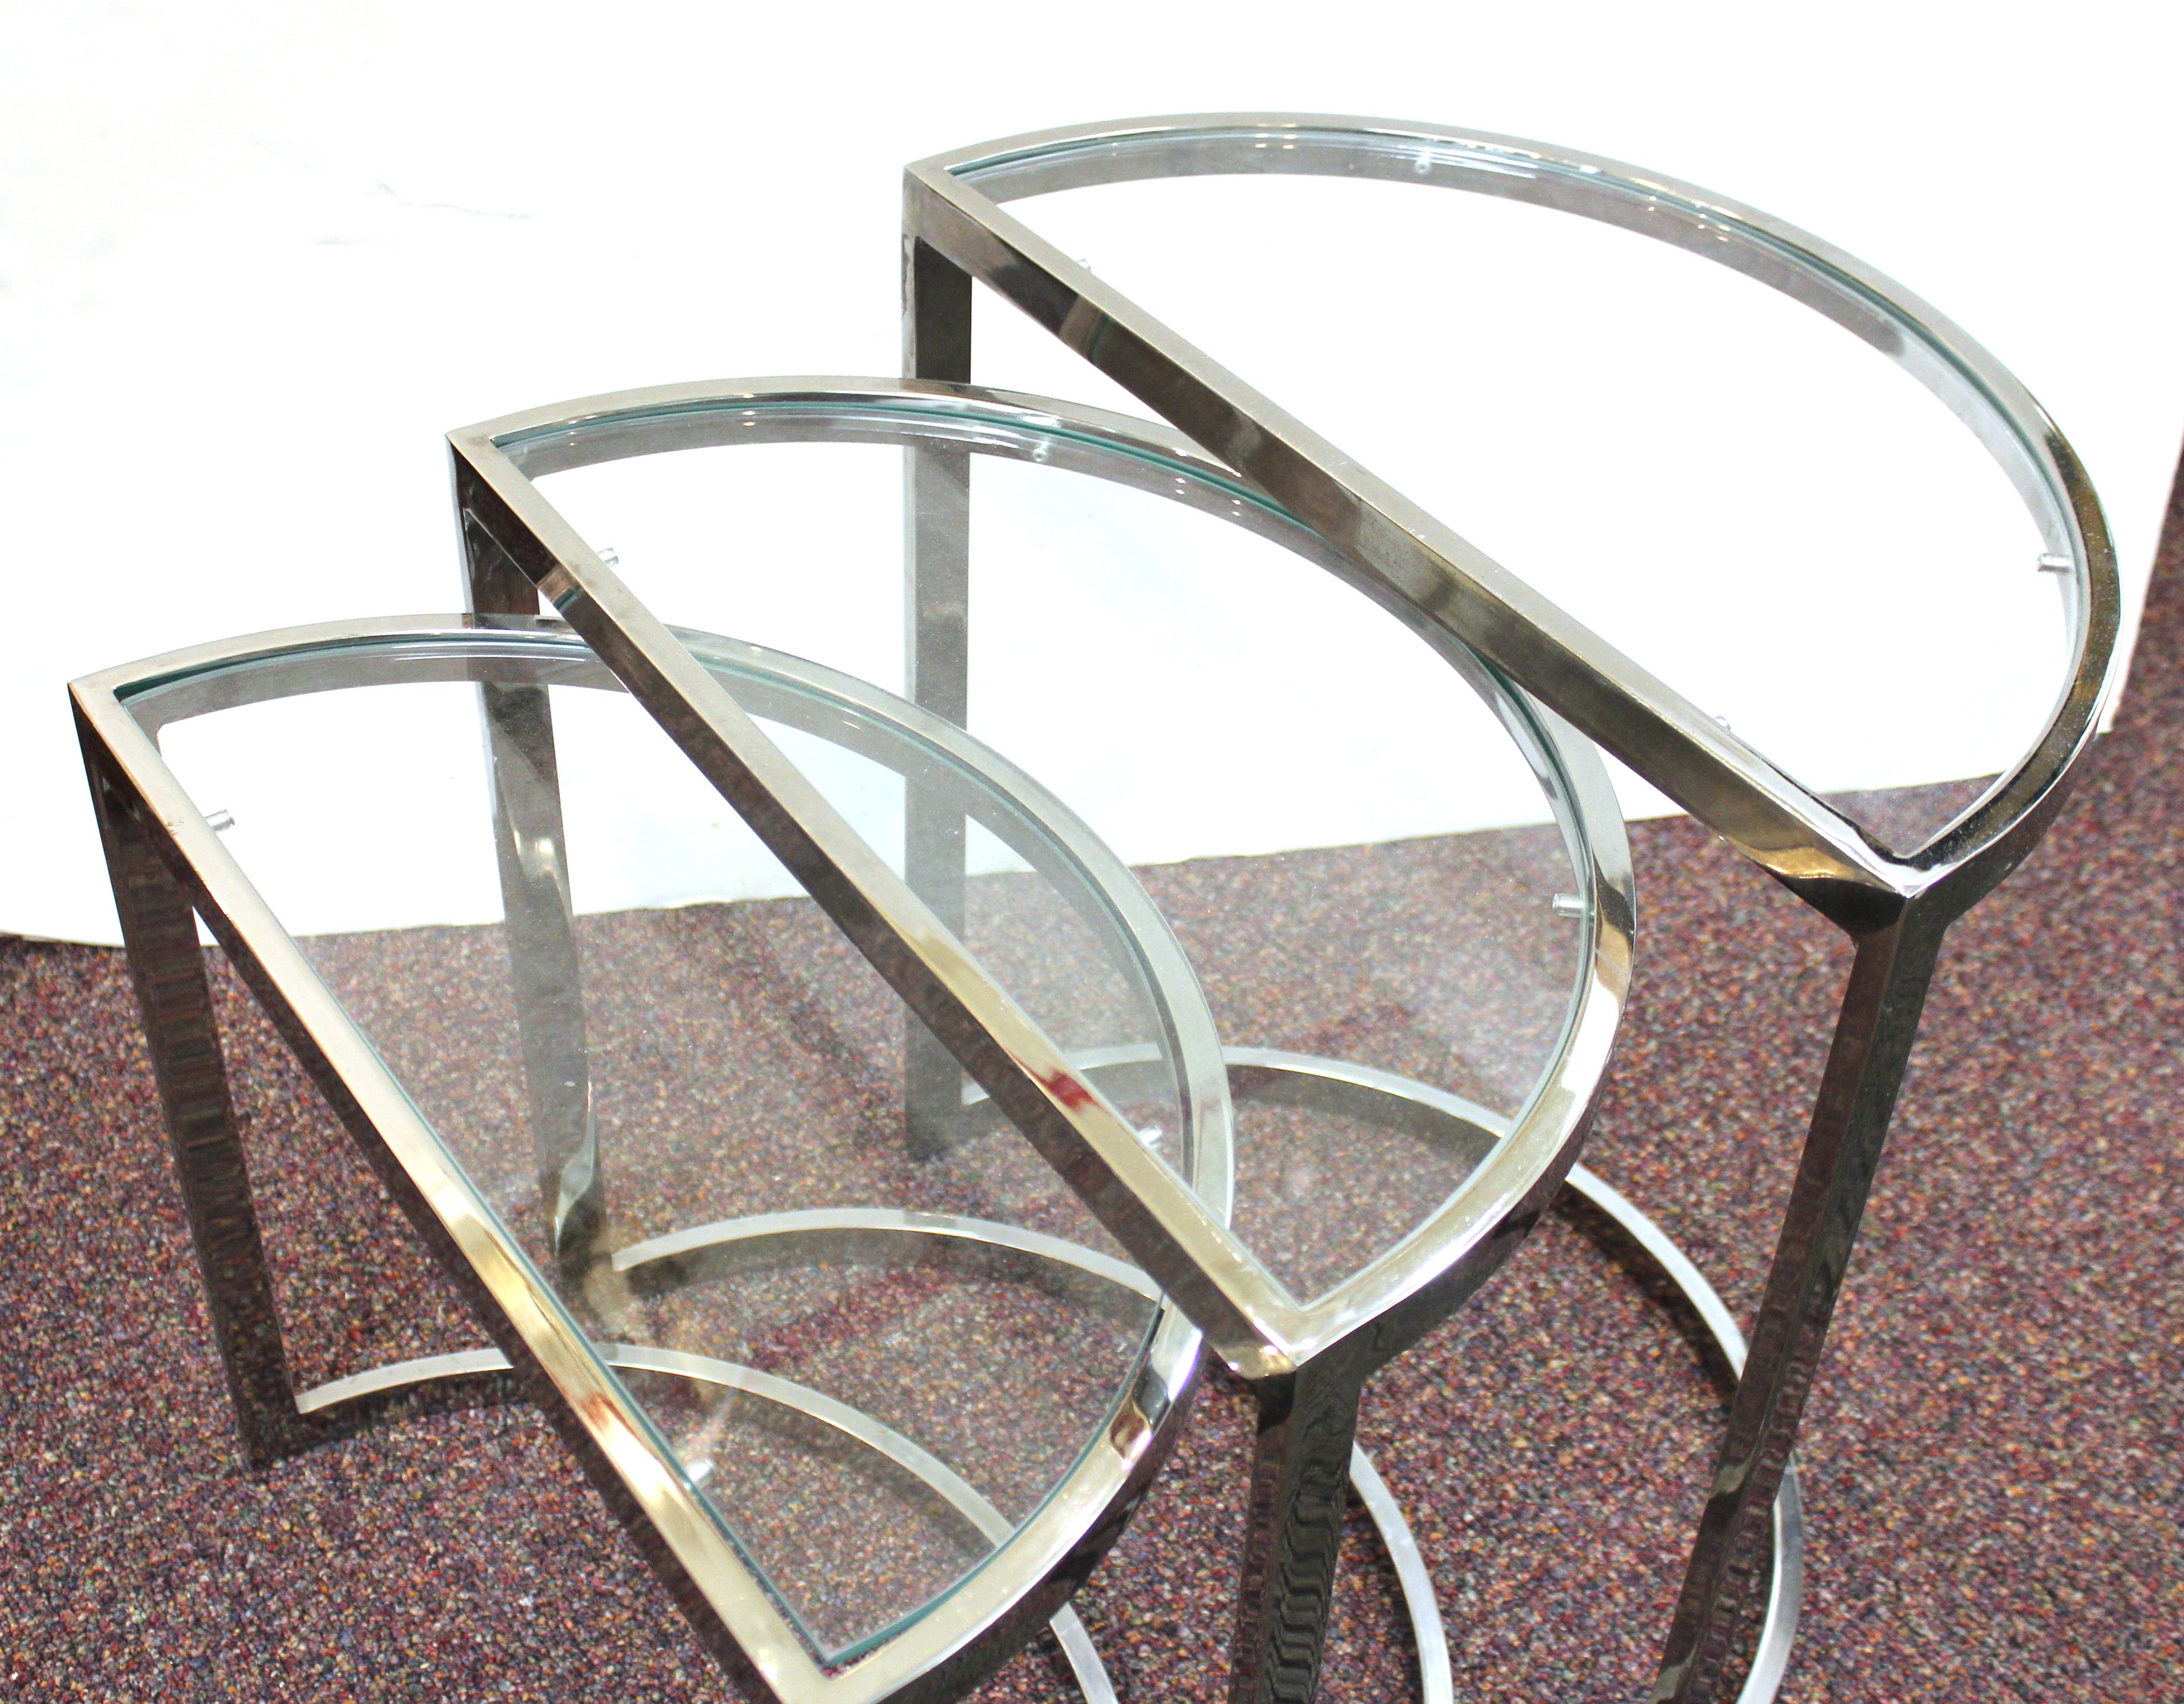 Set of three Mid-Century Modern chrome frame nesting tables in half-moon shapes with glass tops. Can fit into each other in various ways. Some minor scratches to the chrome finish, but overall in great vintage condition.